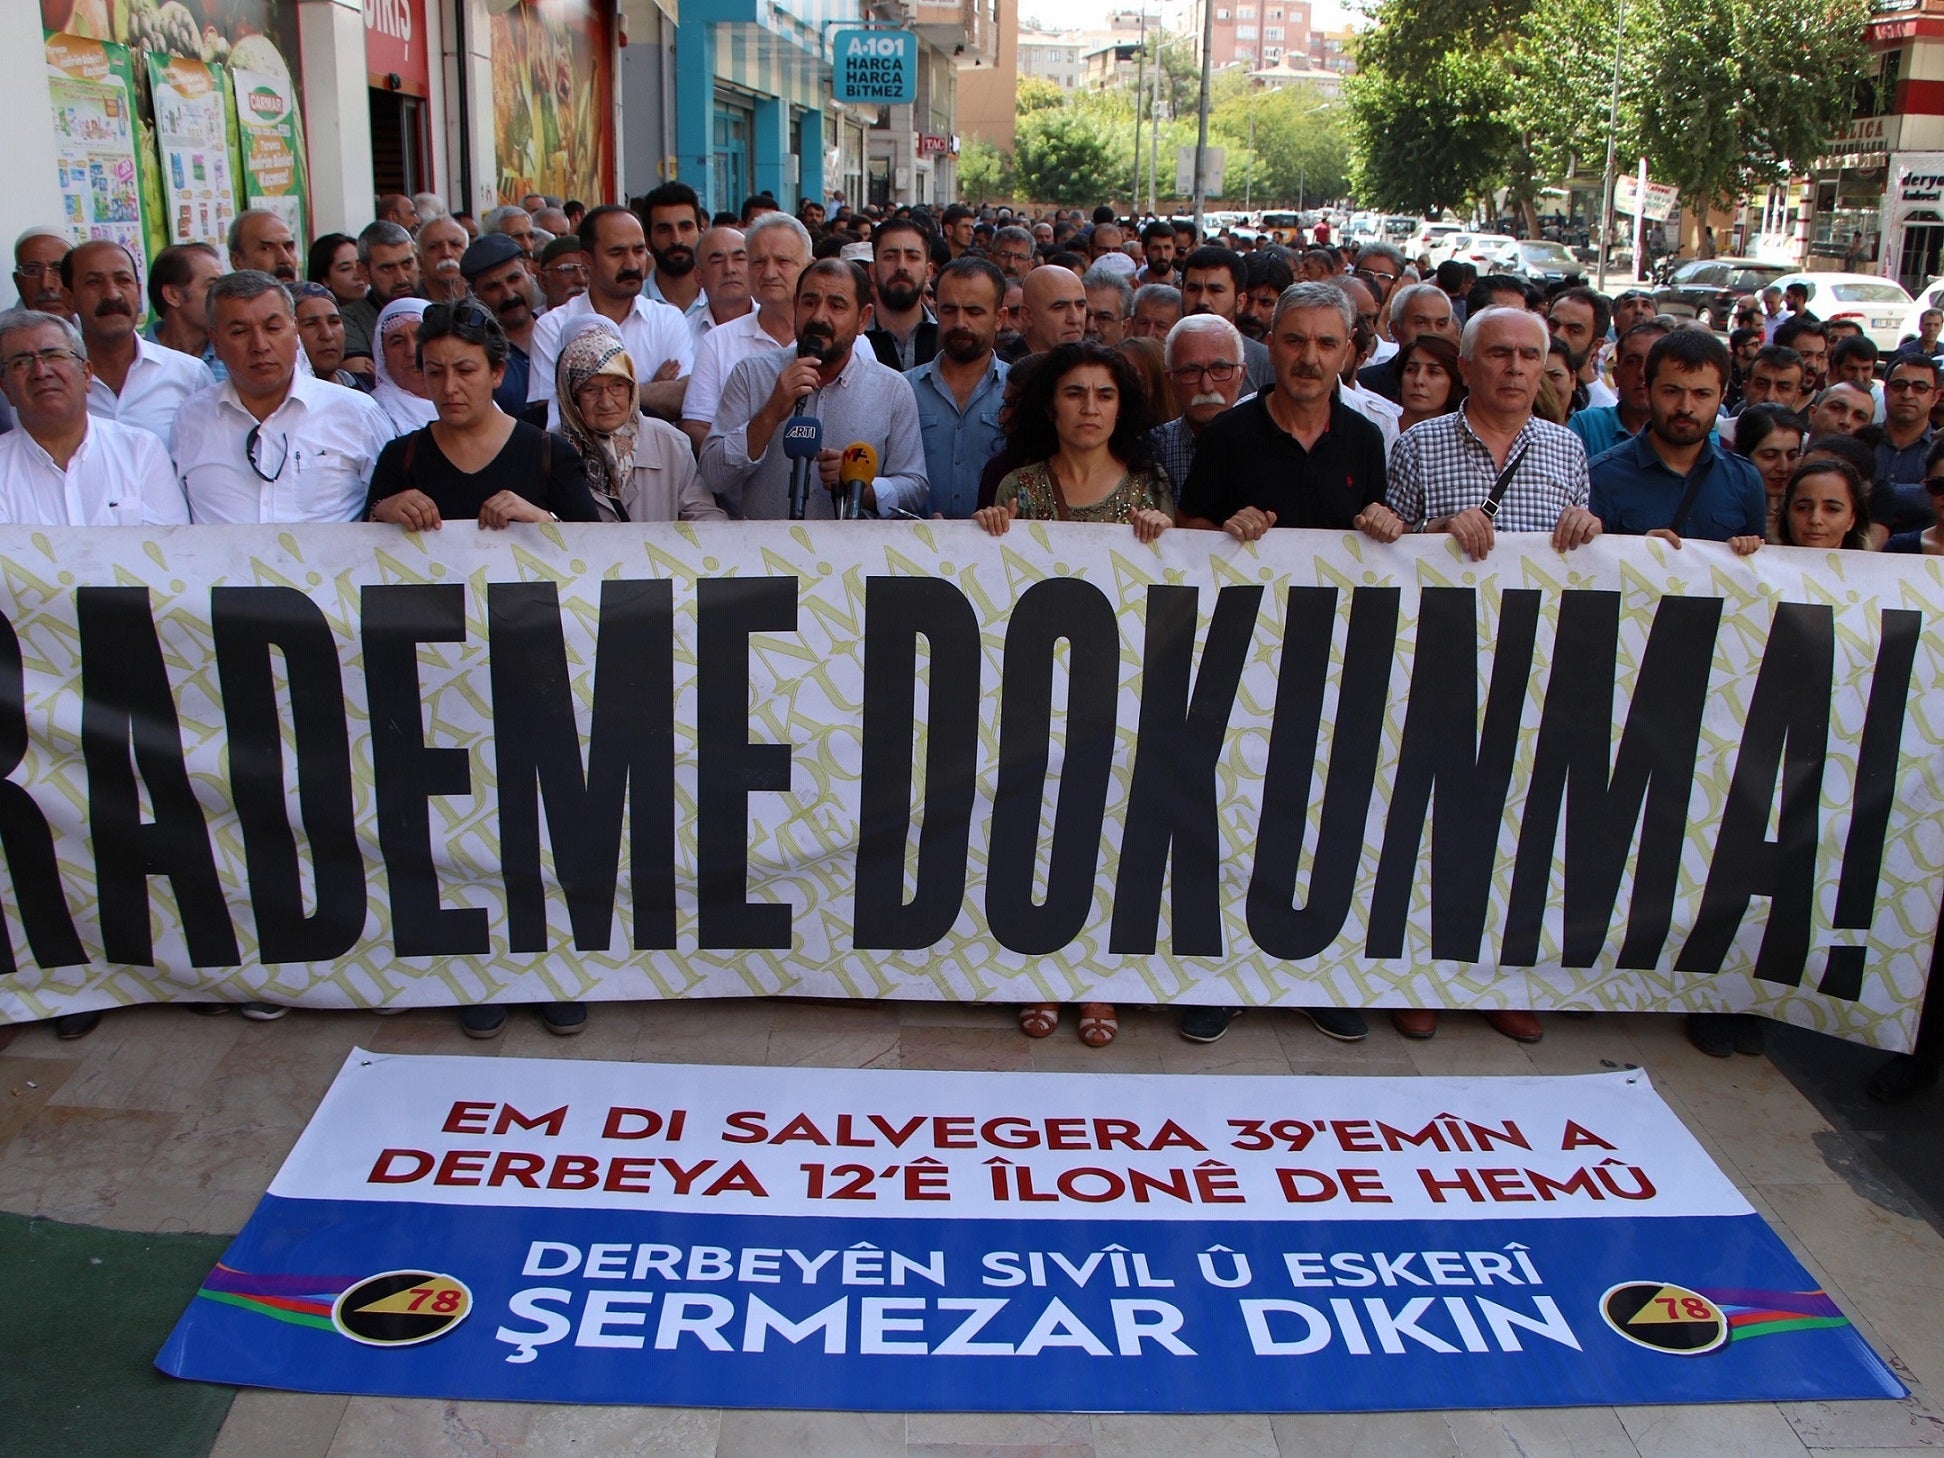 Diyarbakır residents hold a banner and march in protest against the removal of elected mayors. 